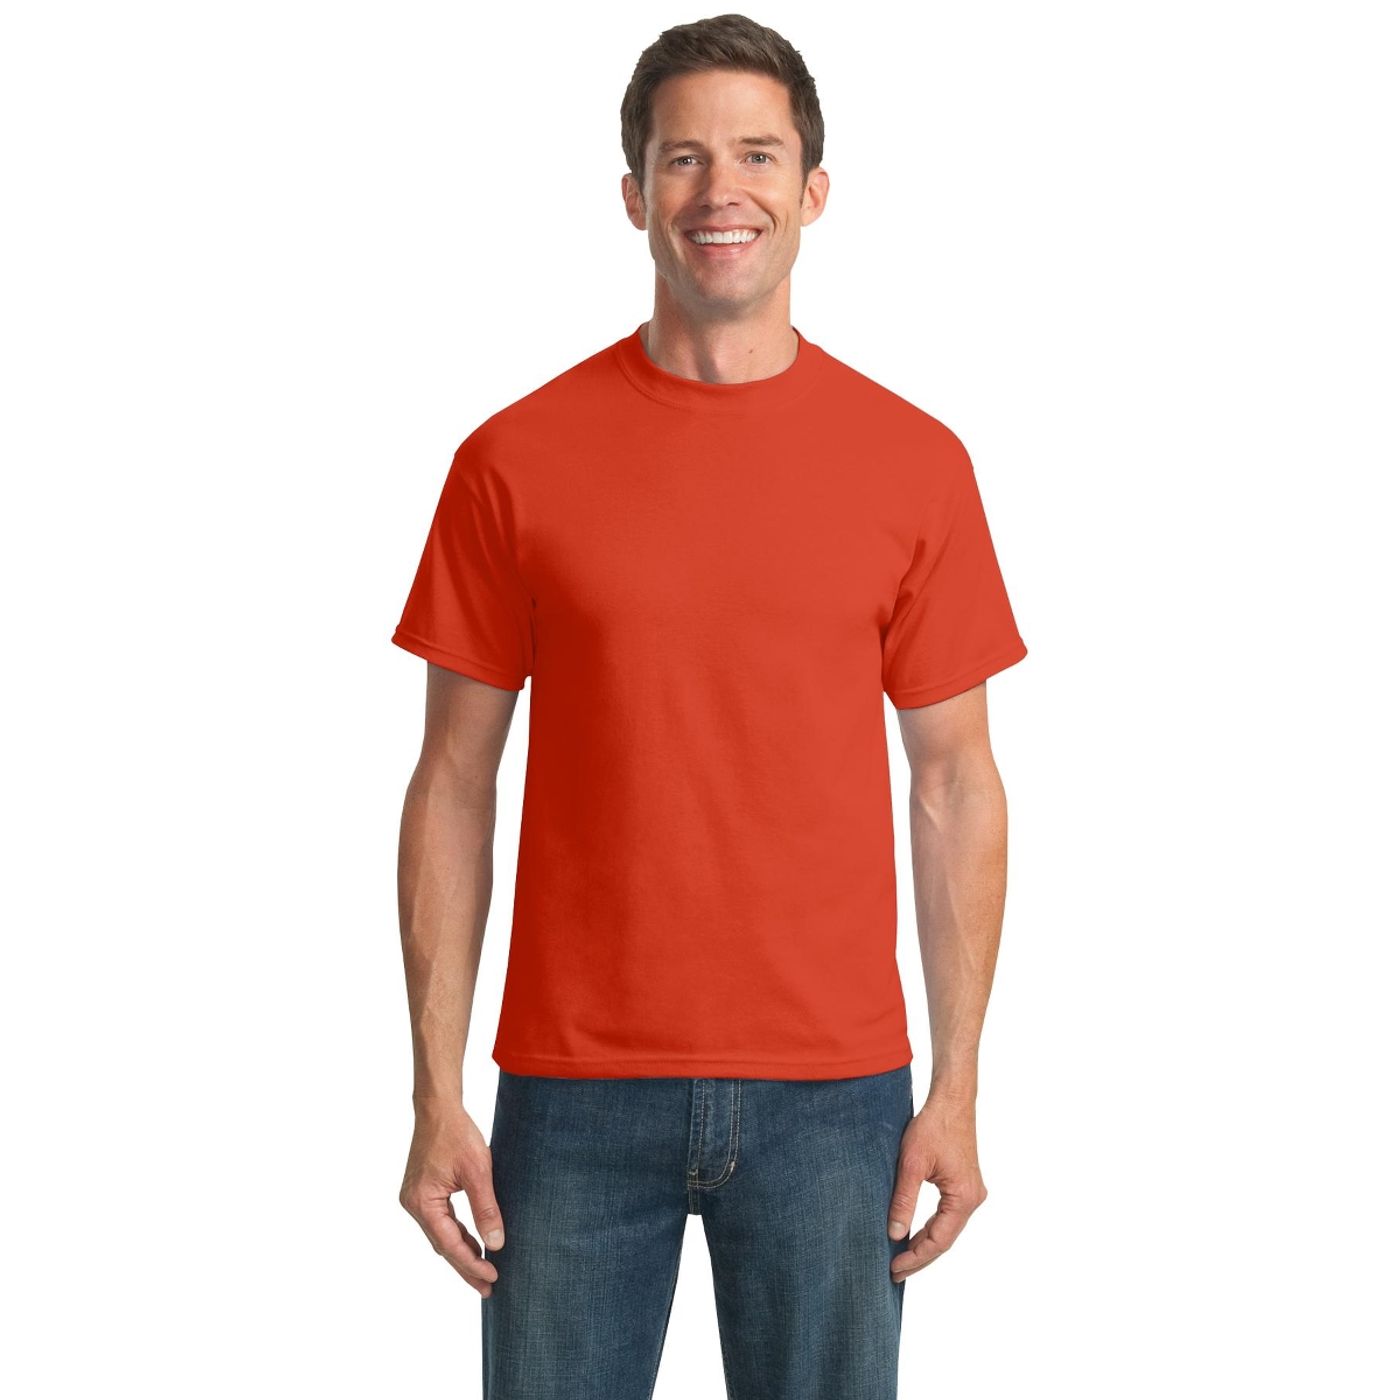 Port and Company 50/50 Cotton/Poly T-Shirt - Dark/Colors | Wrist-Band ...